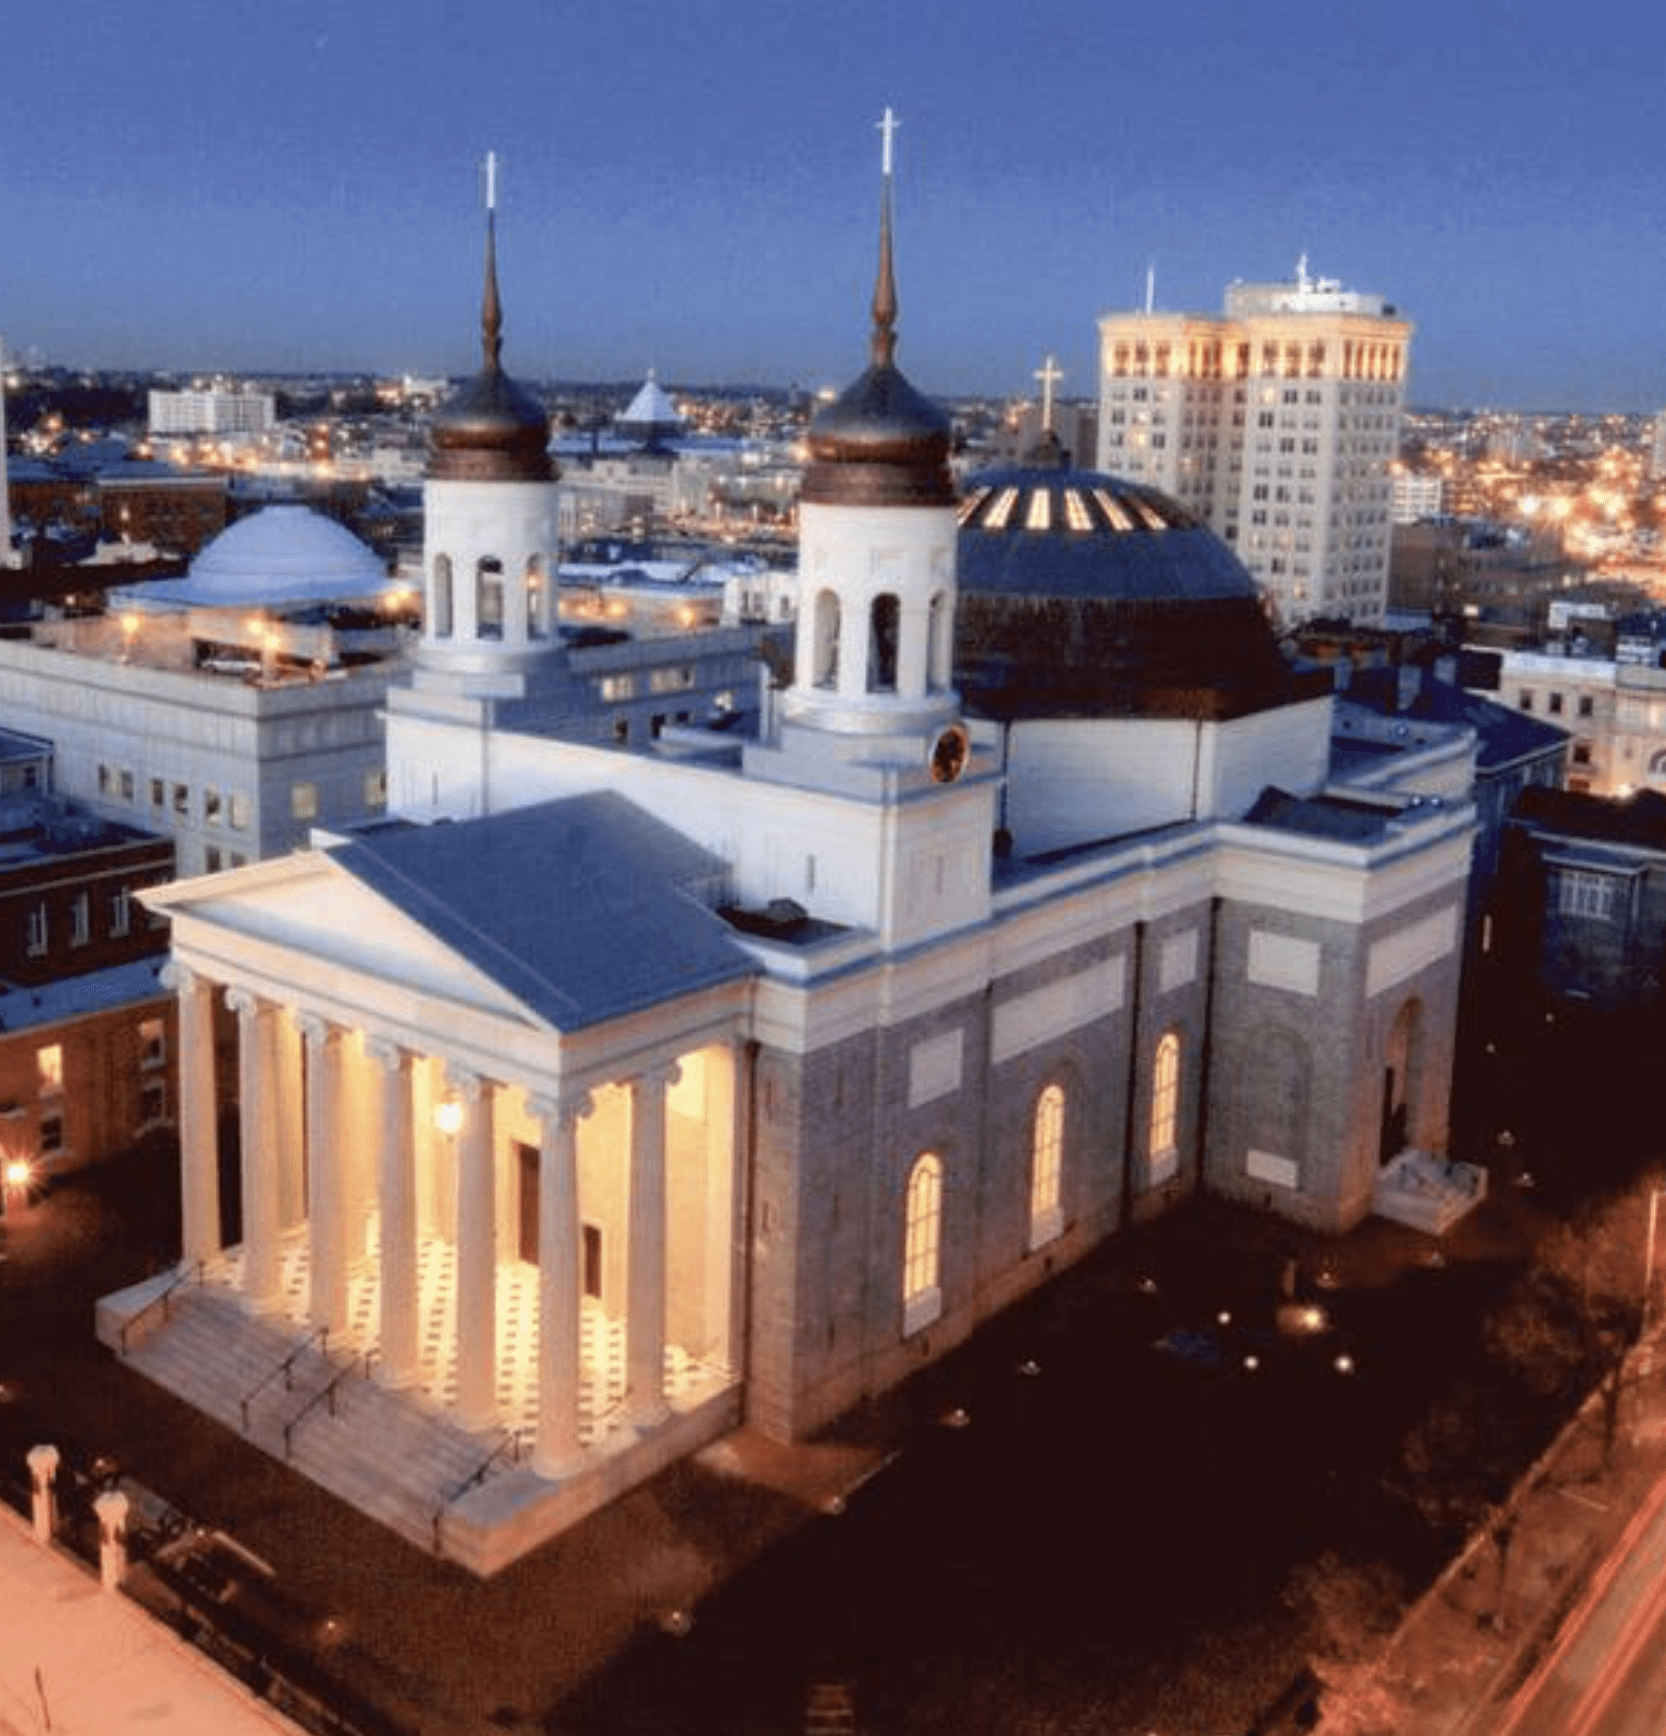 Baltimore's Historic Charles Street - Basilica of the National Shrine of the Assumption